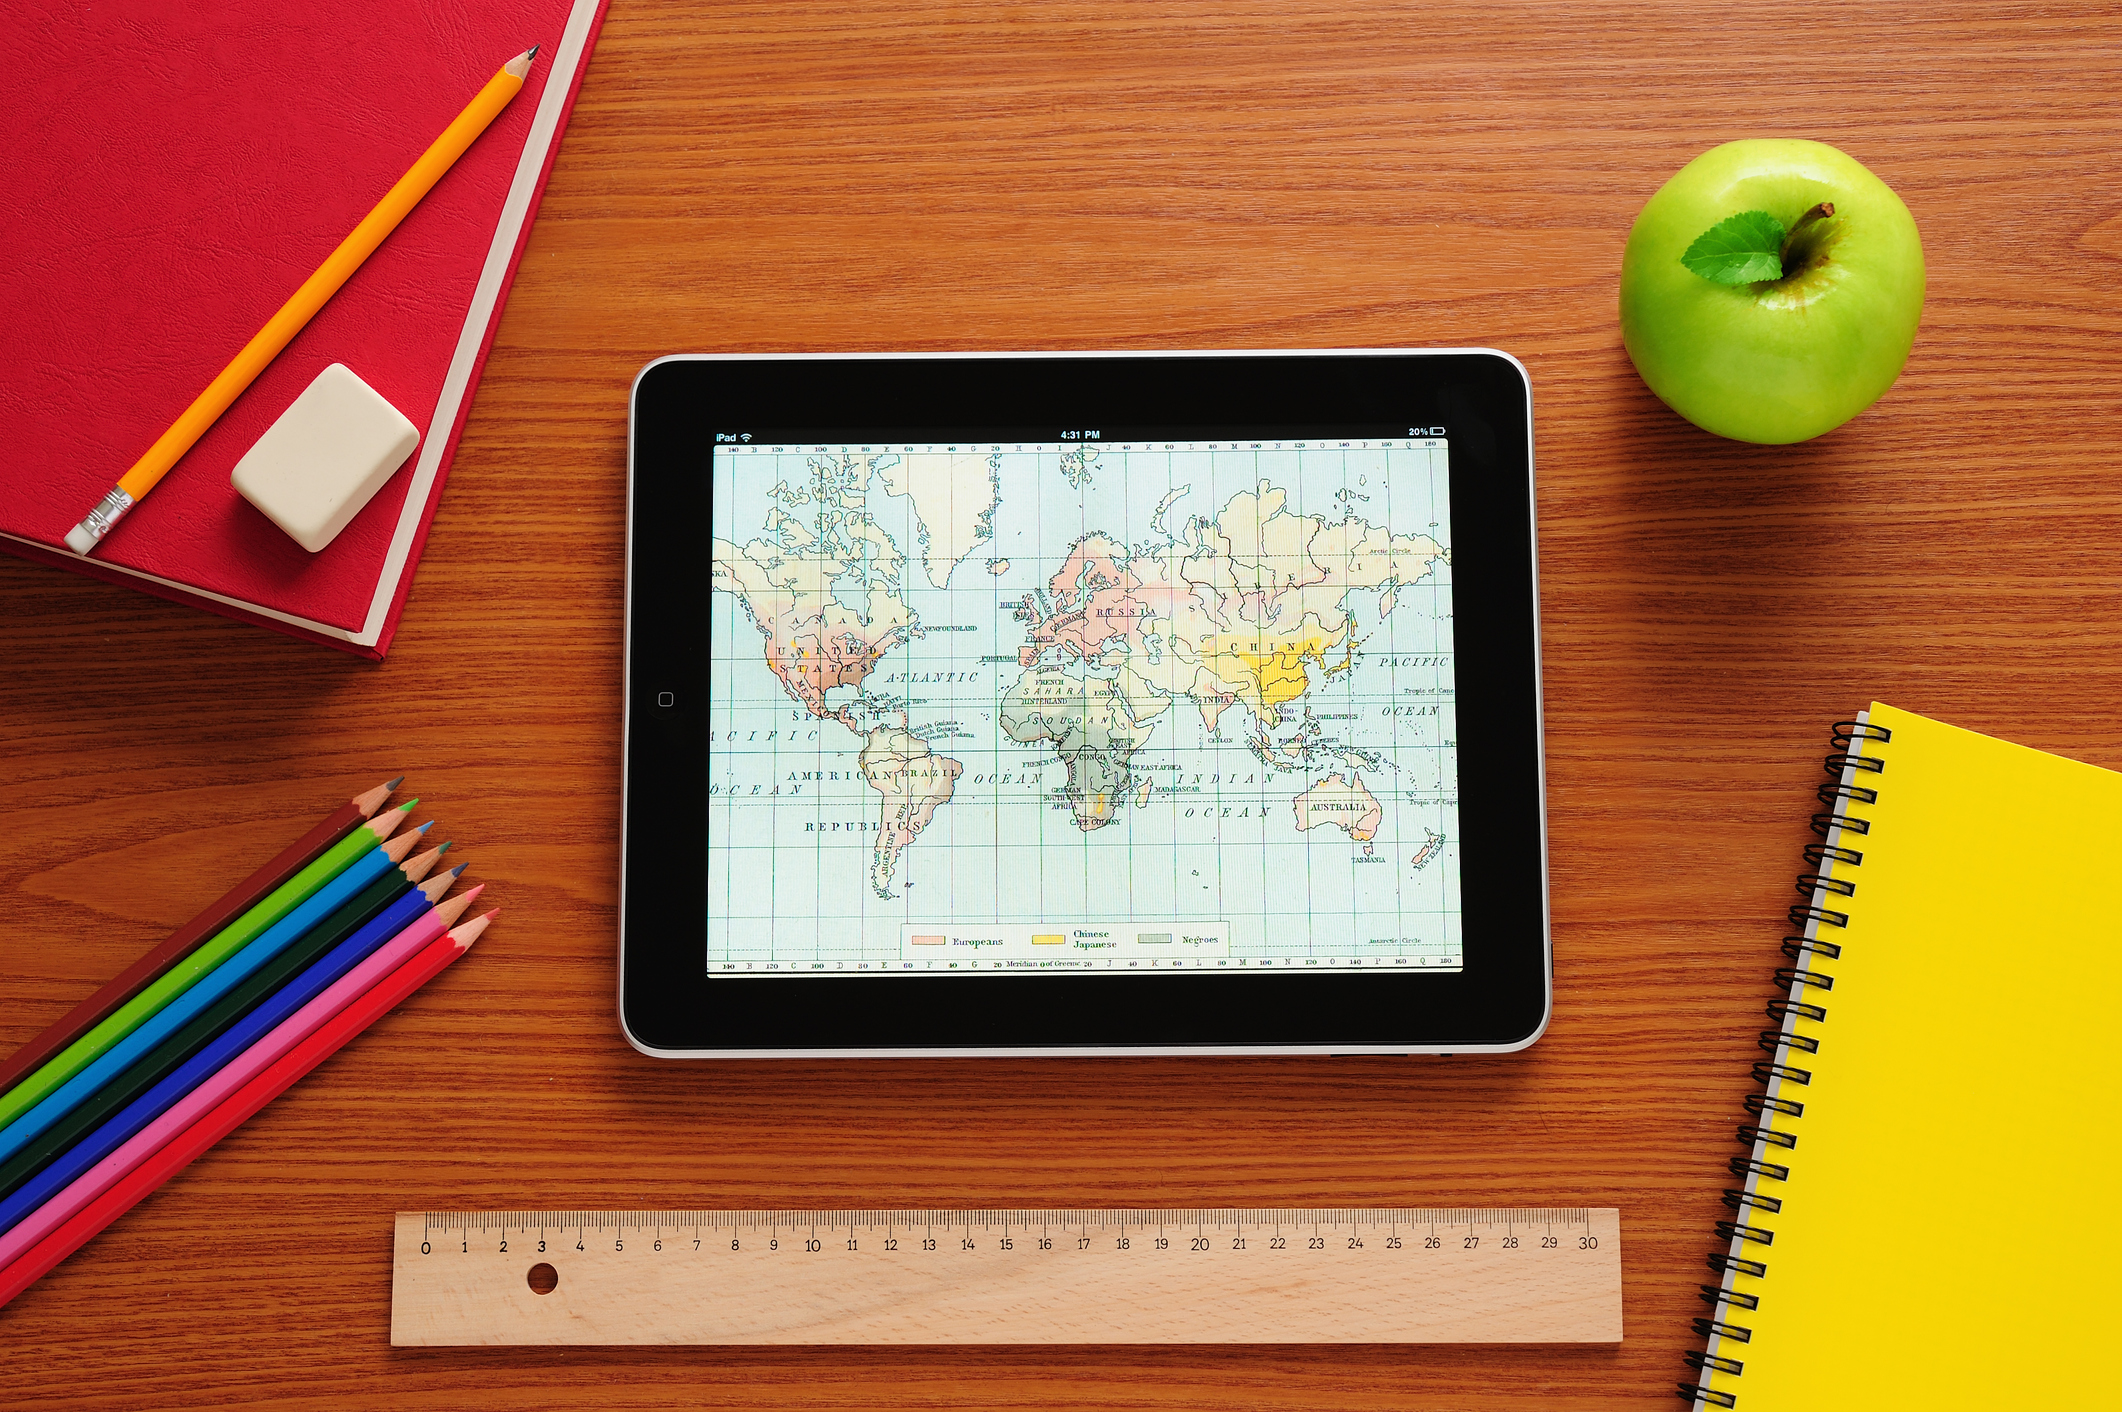 Desk with tablet showing a map, colour pencils, and writing pad